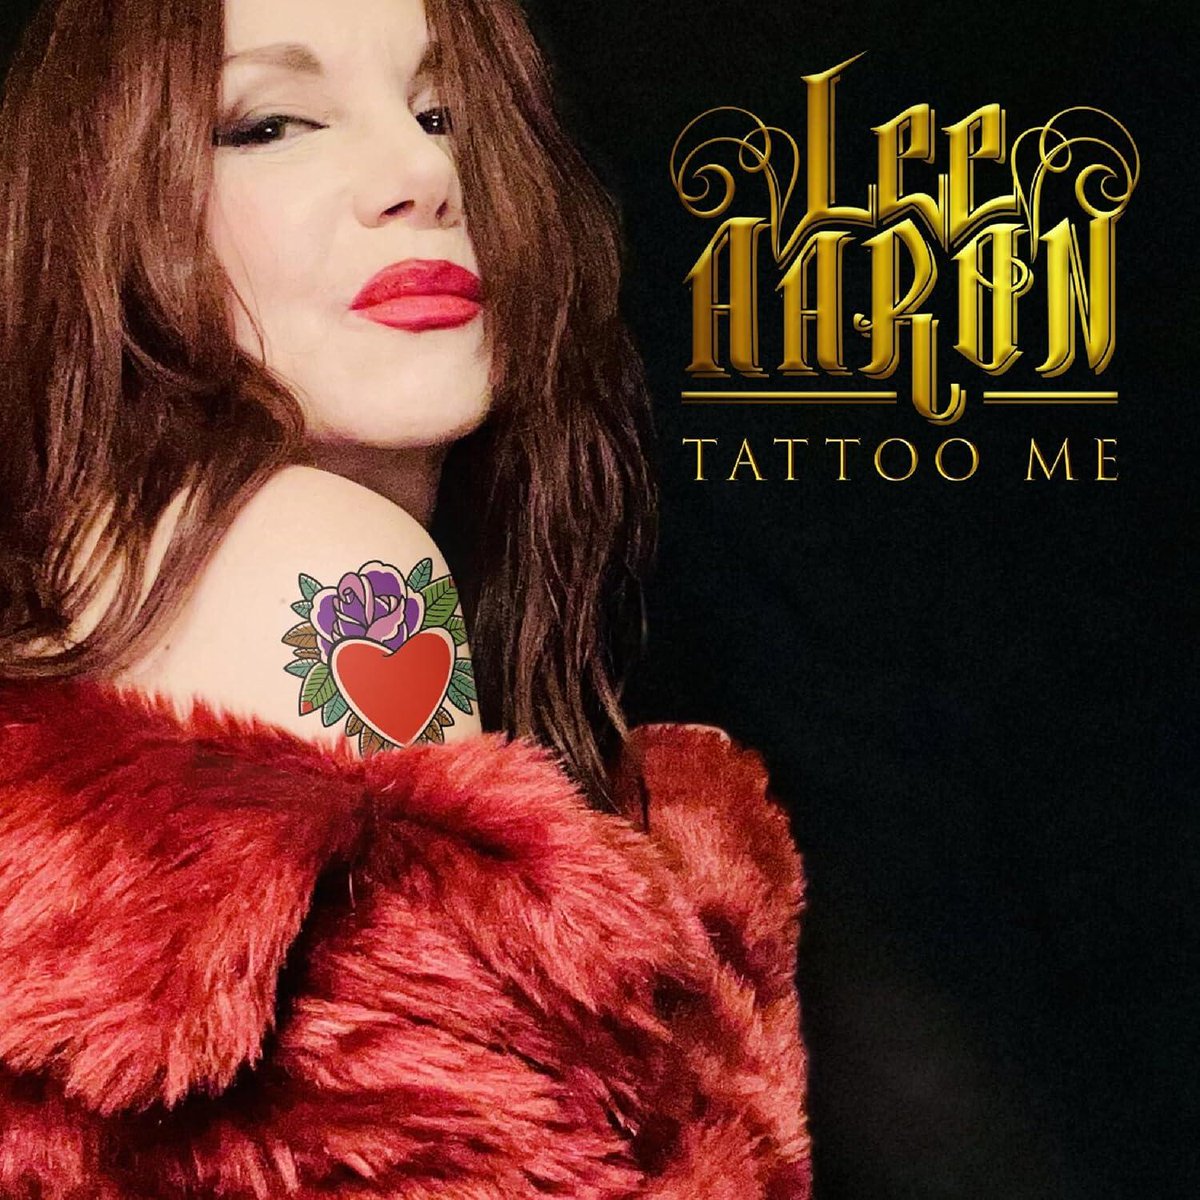 Take a nostalgic journey with Lee Aaron on Tattoo Me and join her in celebrating the artists and bands who influenced and fueled her own rise to become a Canadian rock legend. @LeeAaronMusic @metalvillerec newreleasesnow.com/album/lee-aaro…